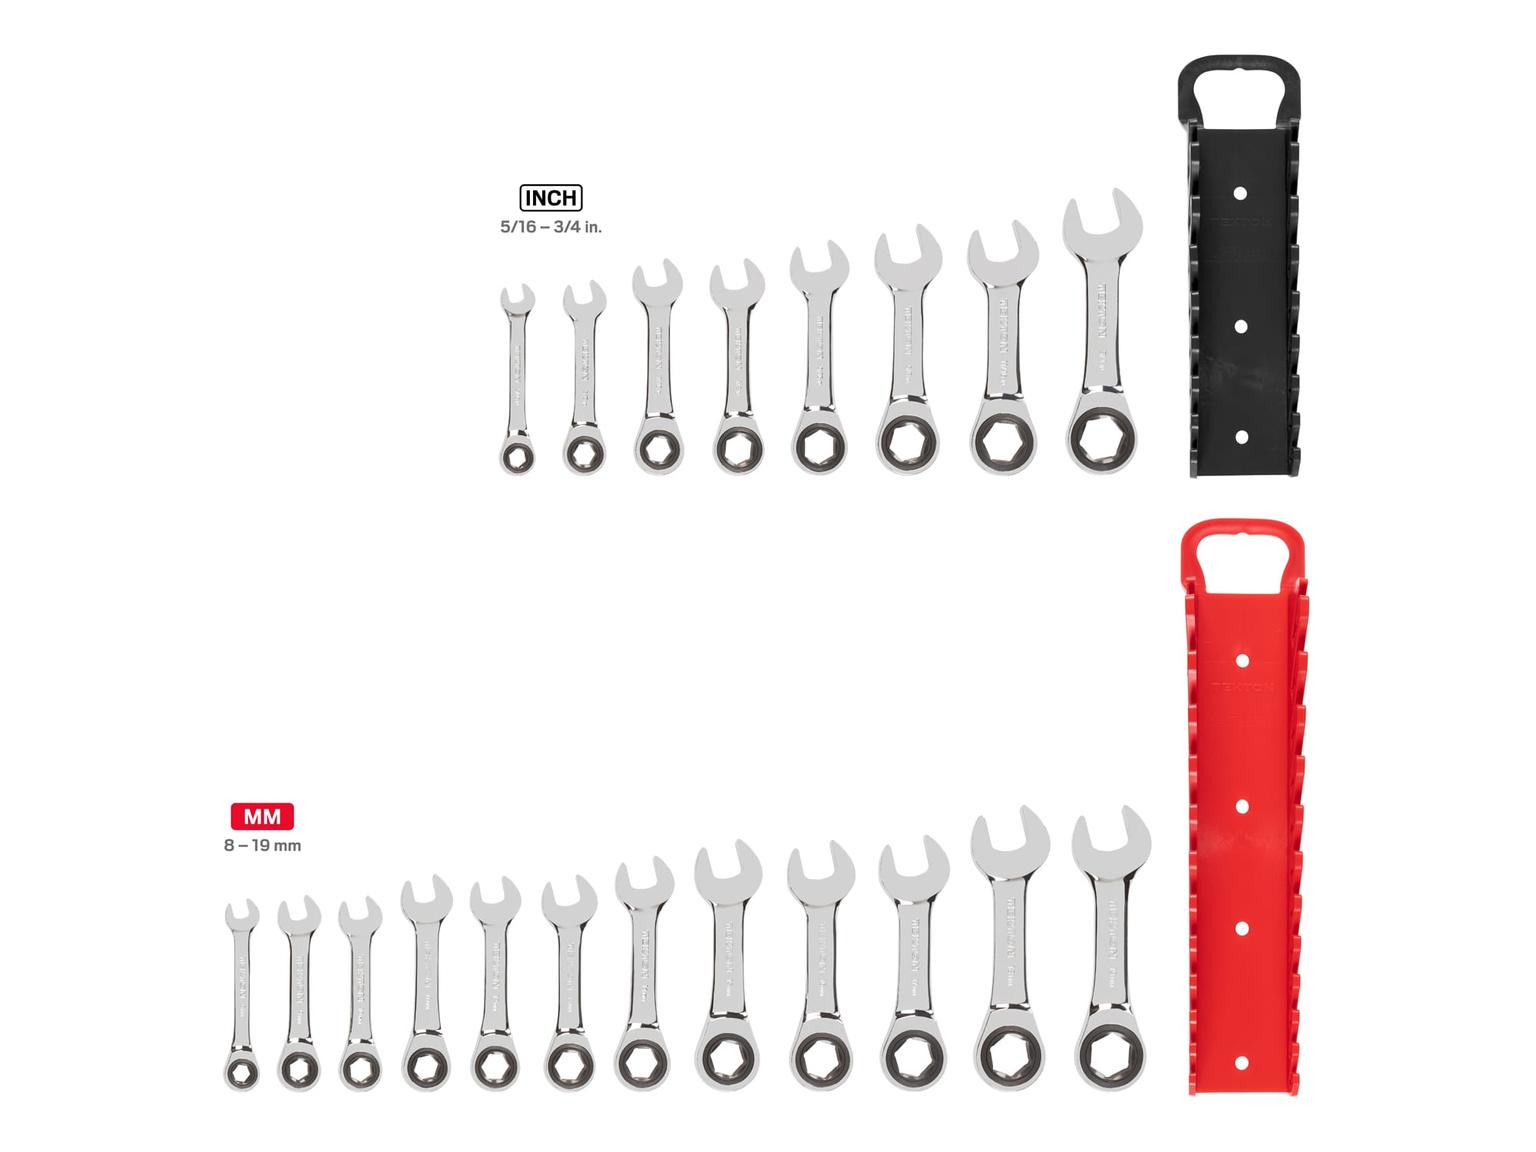 TEKTON WRN50321-T Stubby Ratcheting Combination Wrench Set with Holder, 20-Piece (5/16-3/4 in., 8-19 mm)